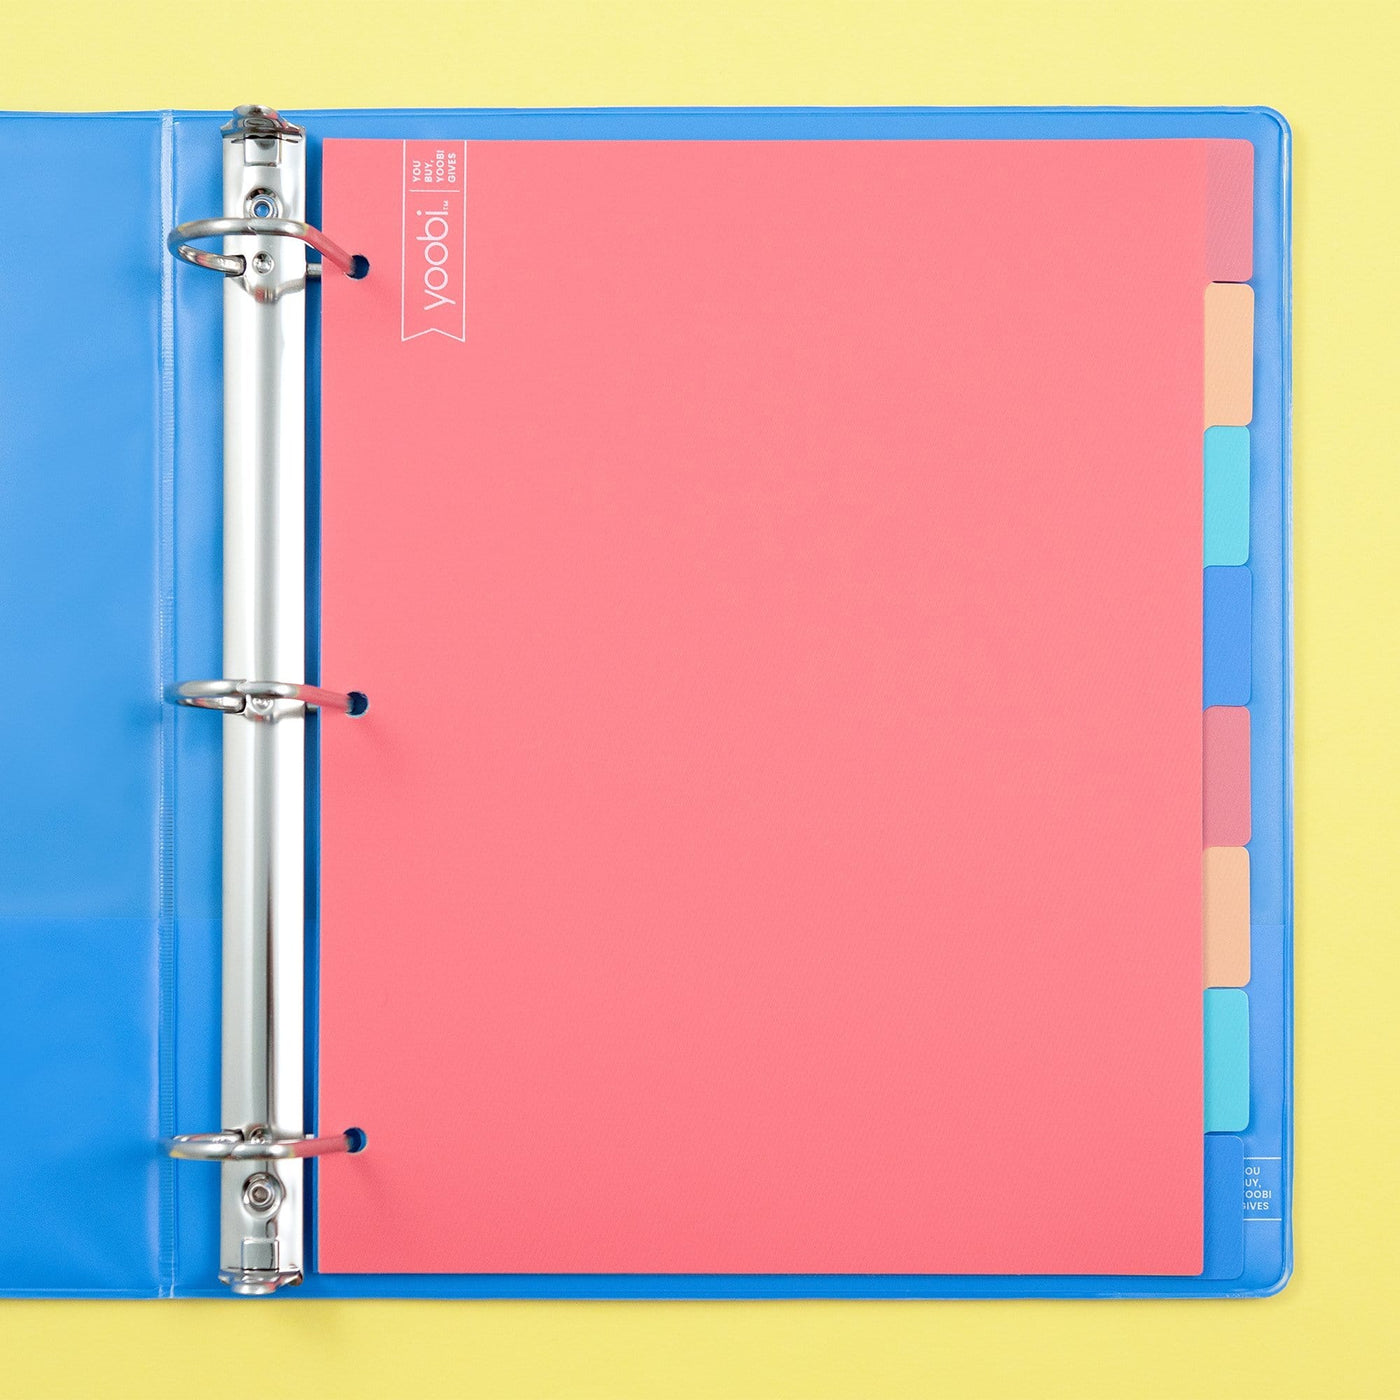 8 tab dividers shown inside of open 3-ring binder